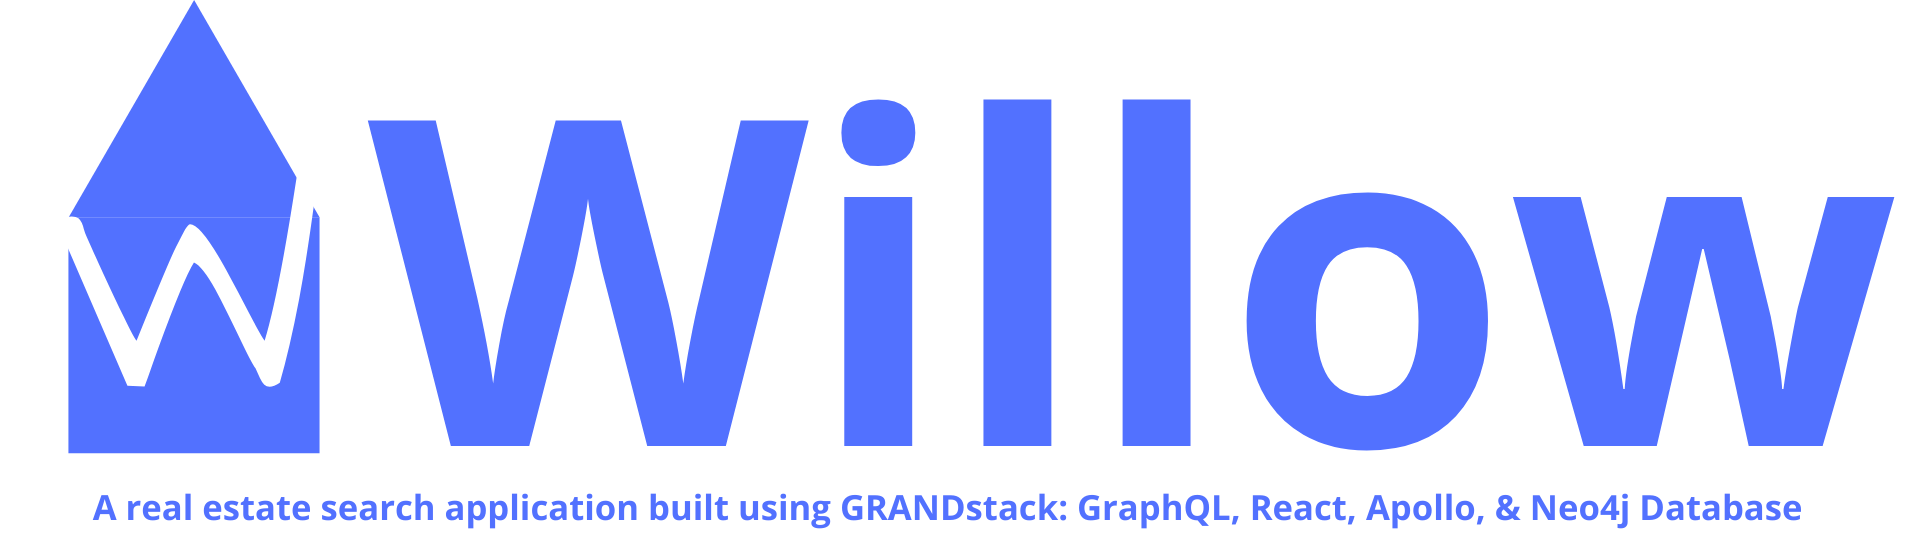 Willow: A real estate search application built using GRANDstack